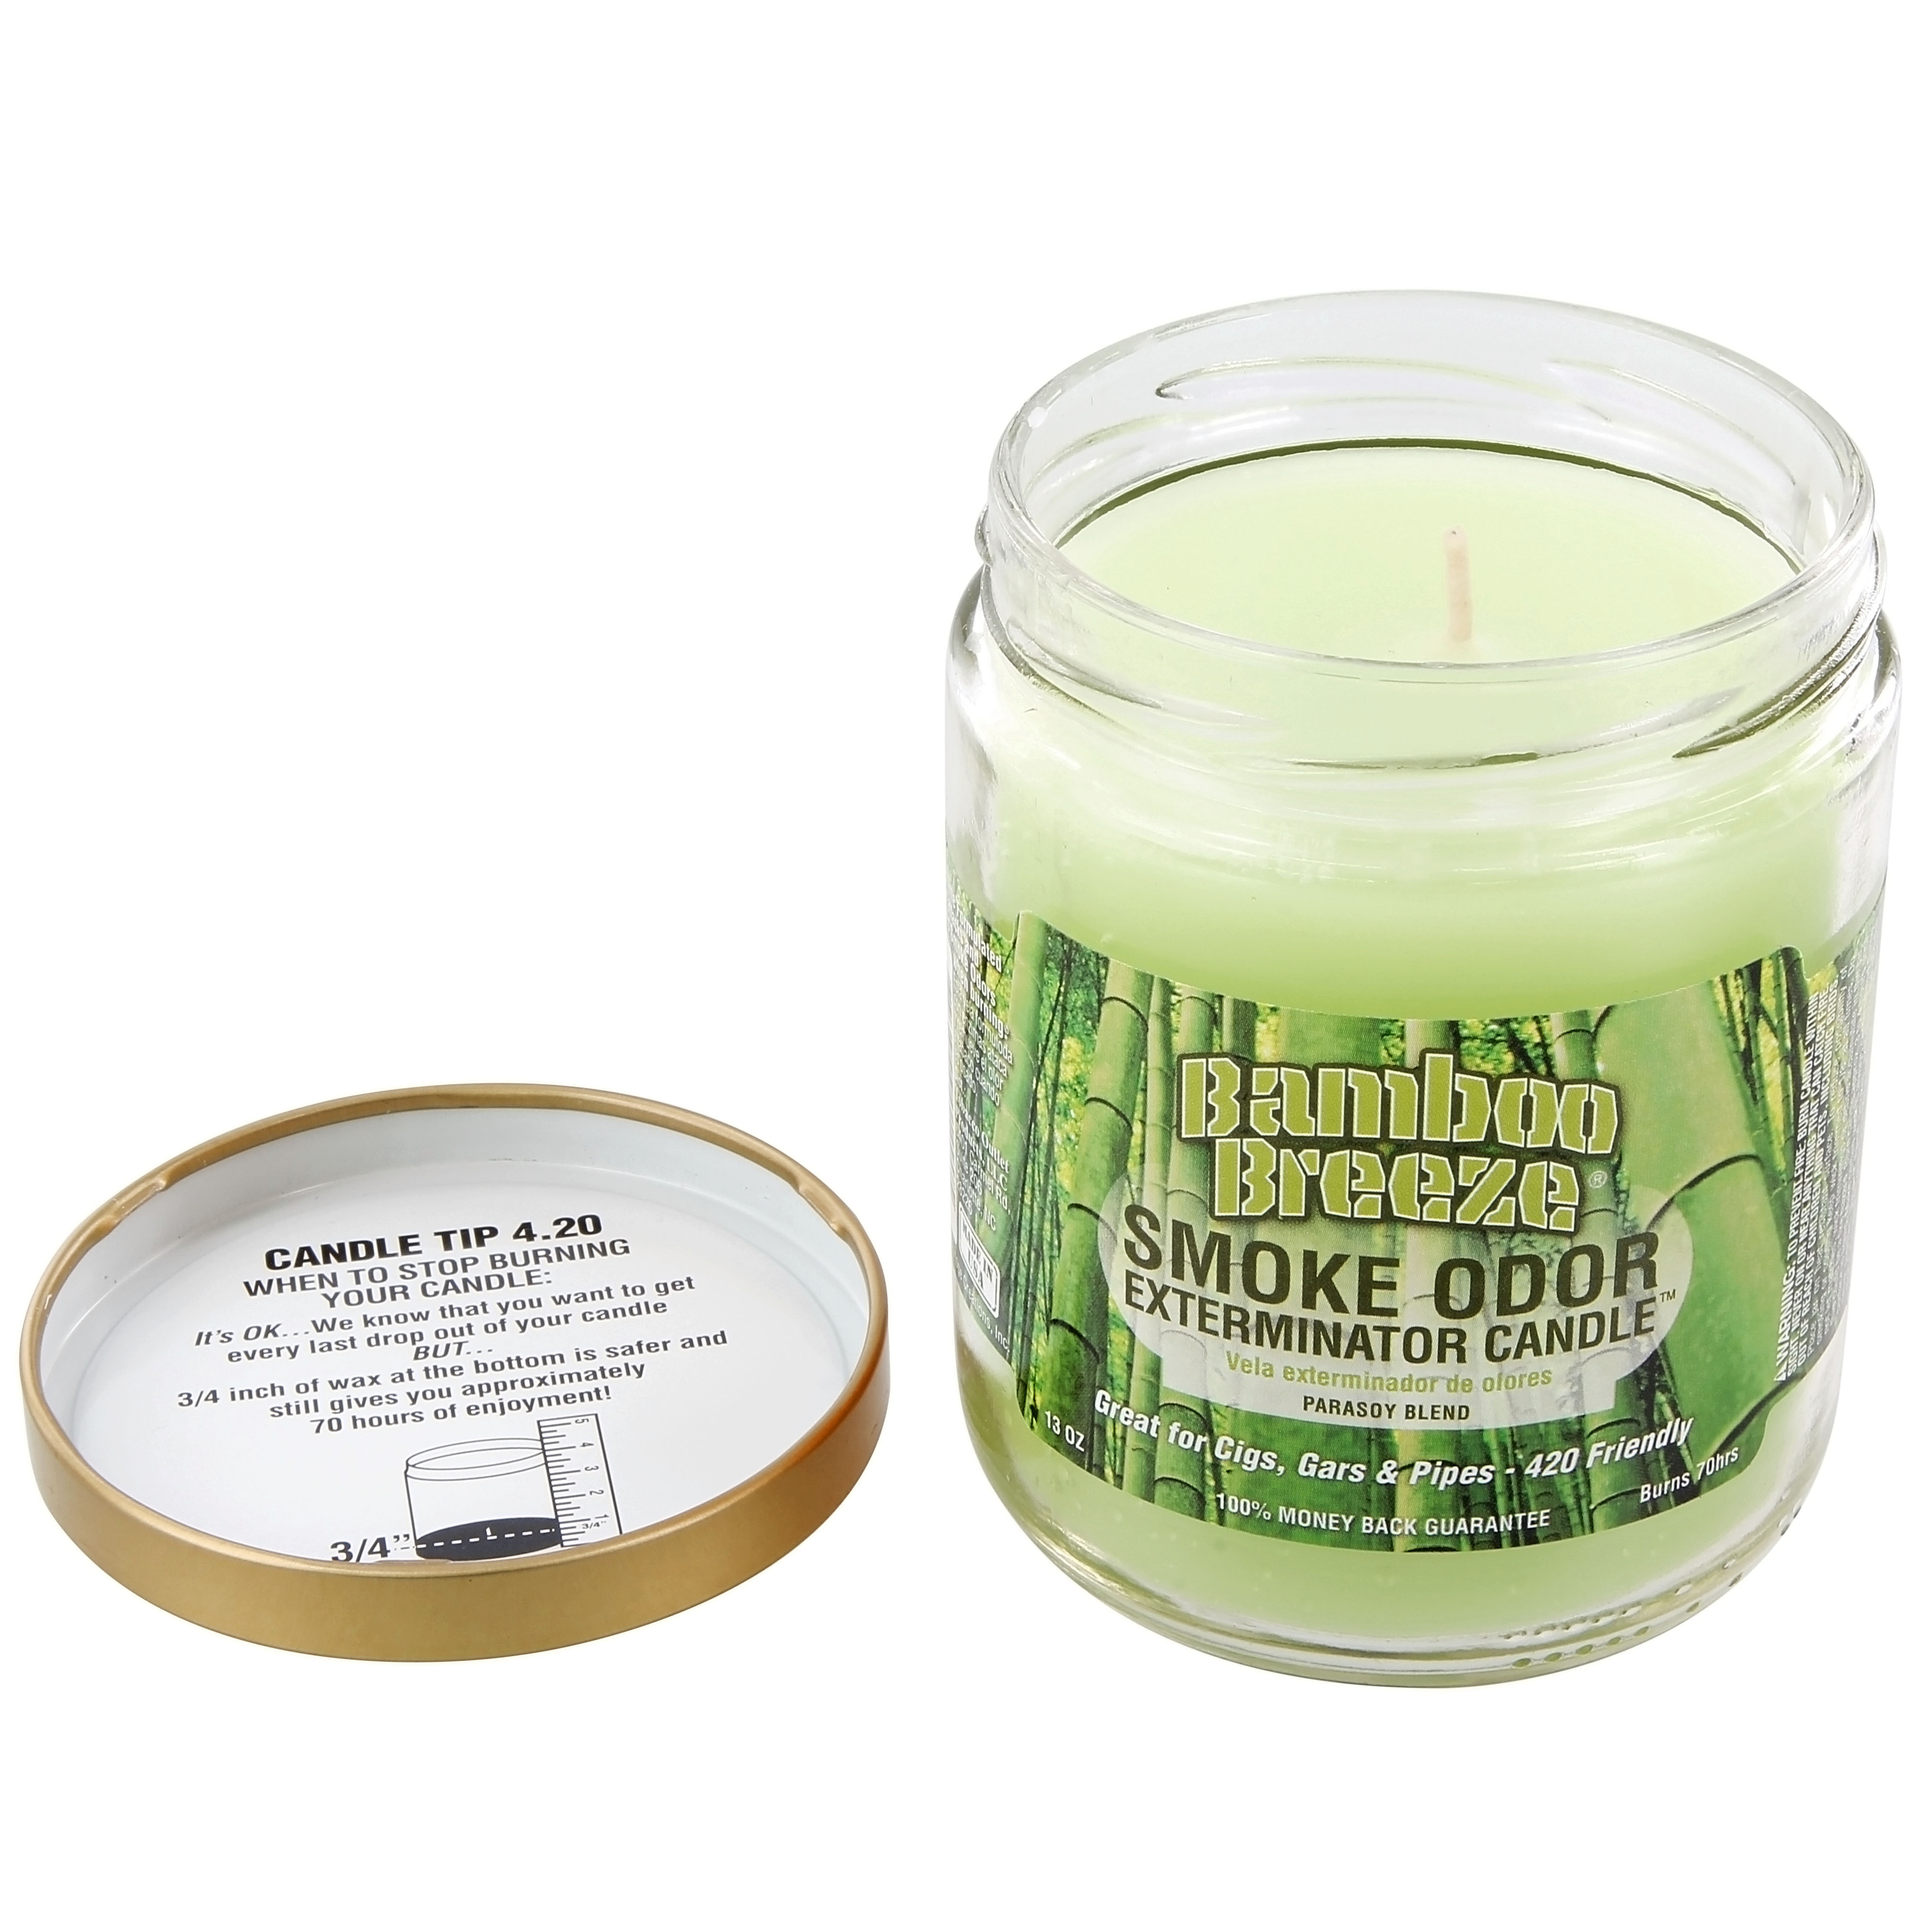 Smoke Odor Exterminator by Smokers Candle 1 or 2 pack 13 oz 